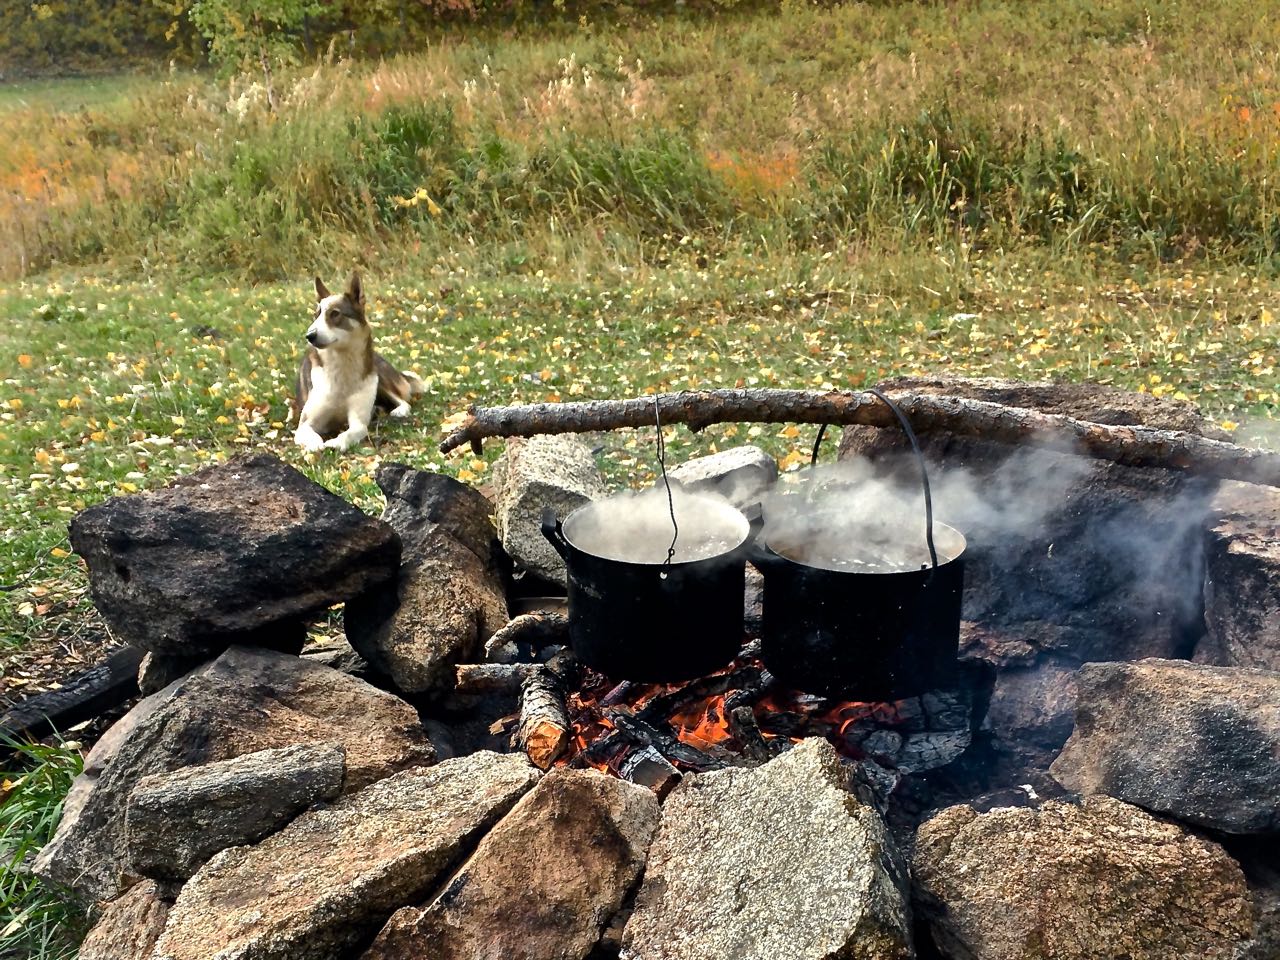 cooking lunch (the dog kept with us hoping to get his share)